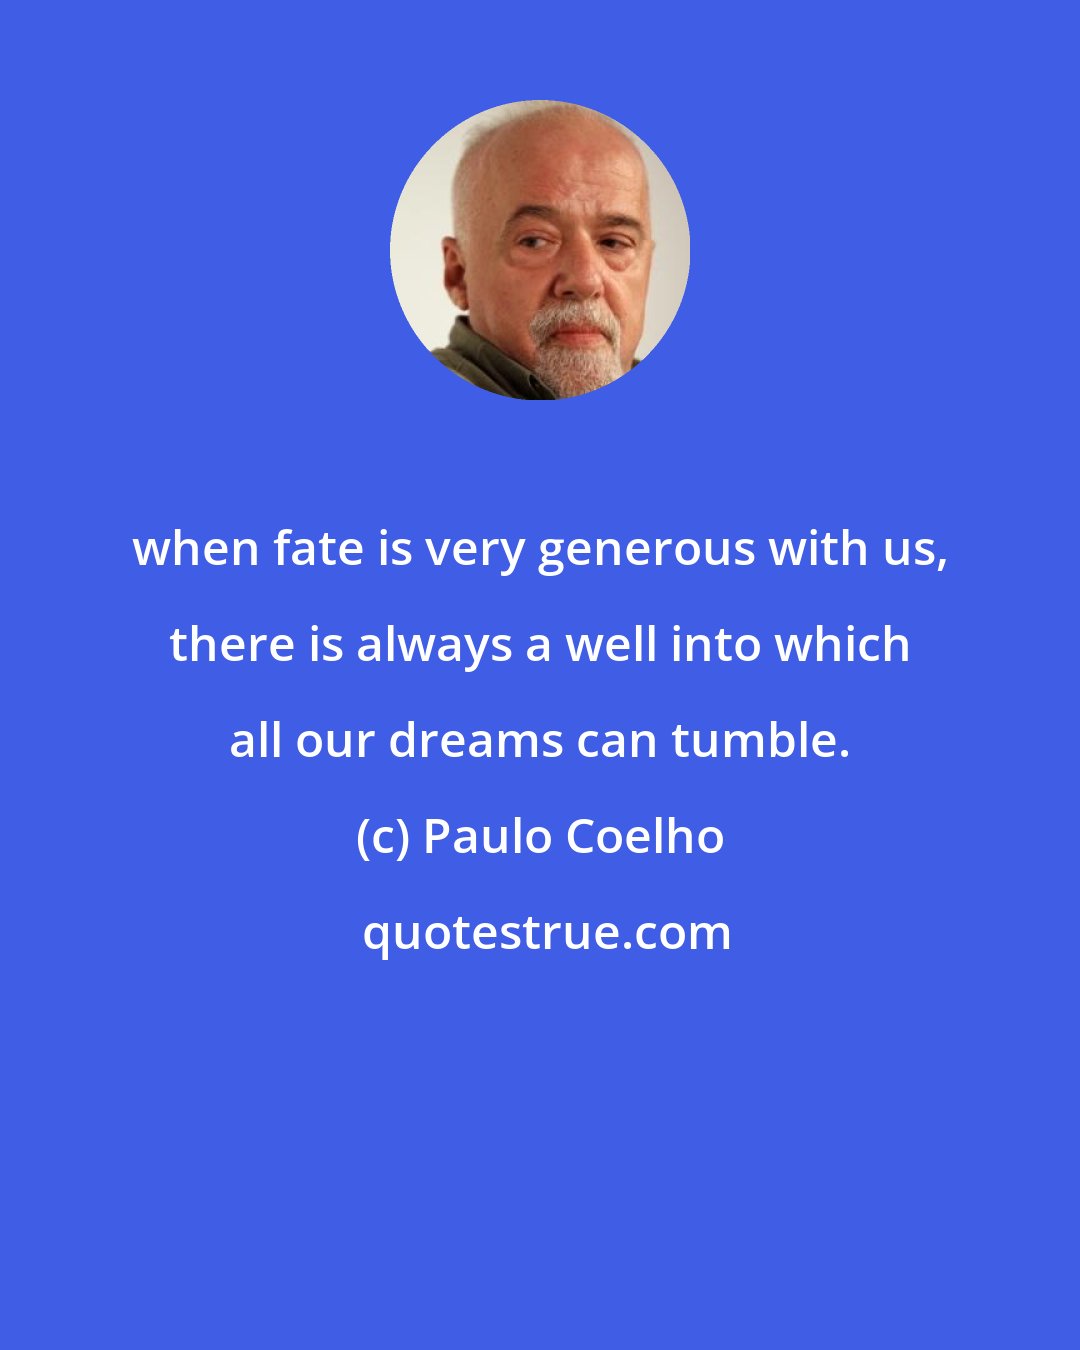 Paulo Coelho: when fate is very generous with us, there is always a well into which all our dreams can tumble.